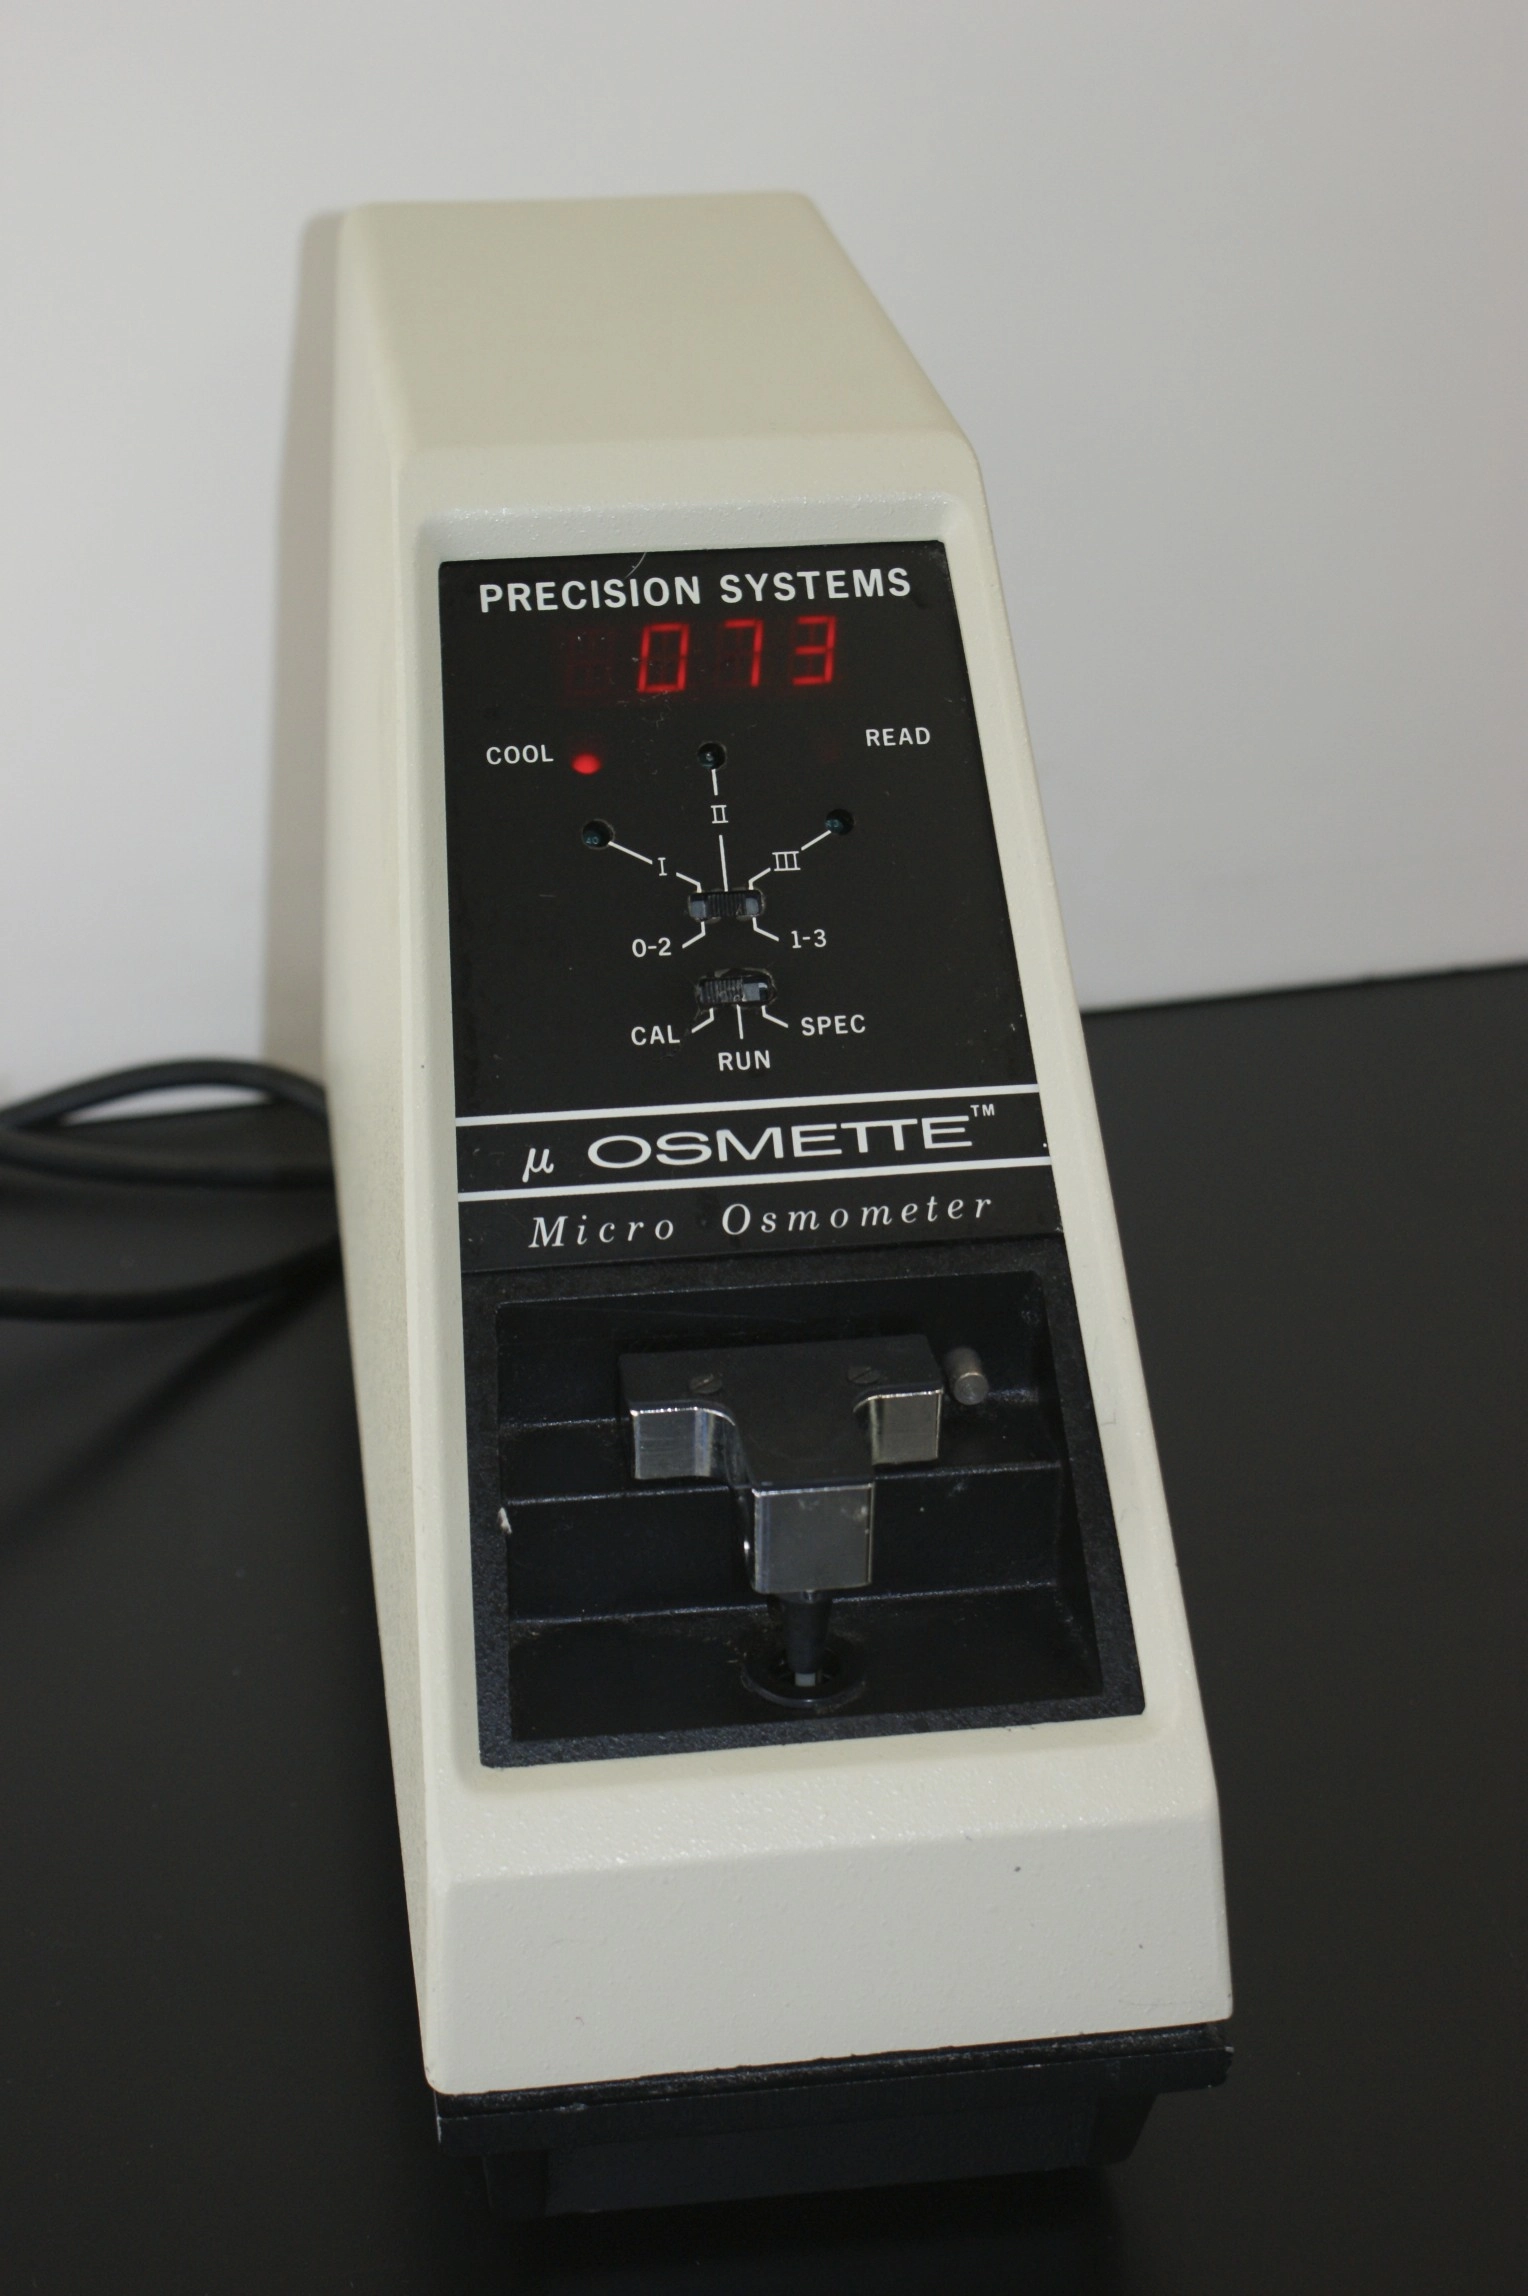 Precision Systems Osmometer 5004, Precision Systems 5004 Osmometer used looks nice powers on